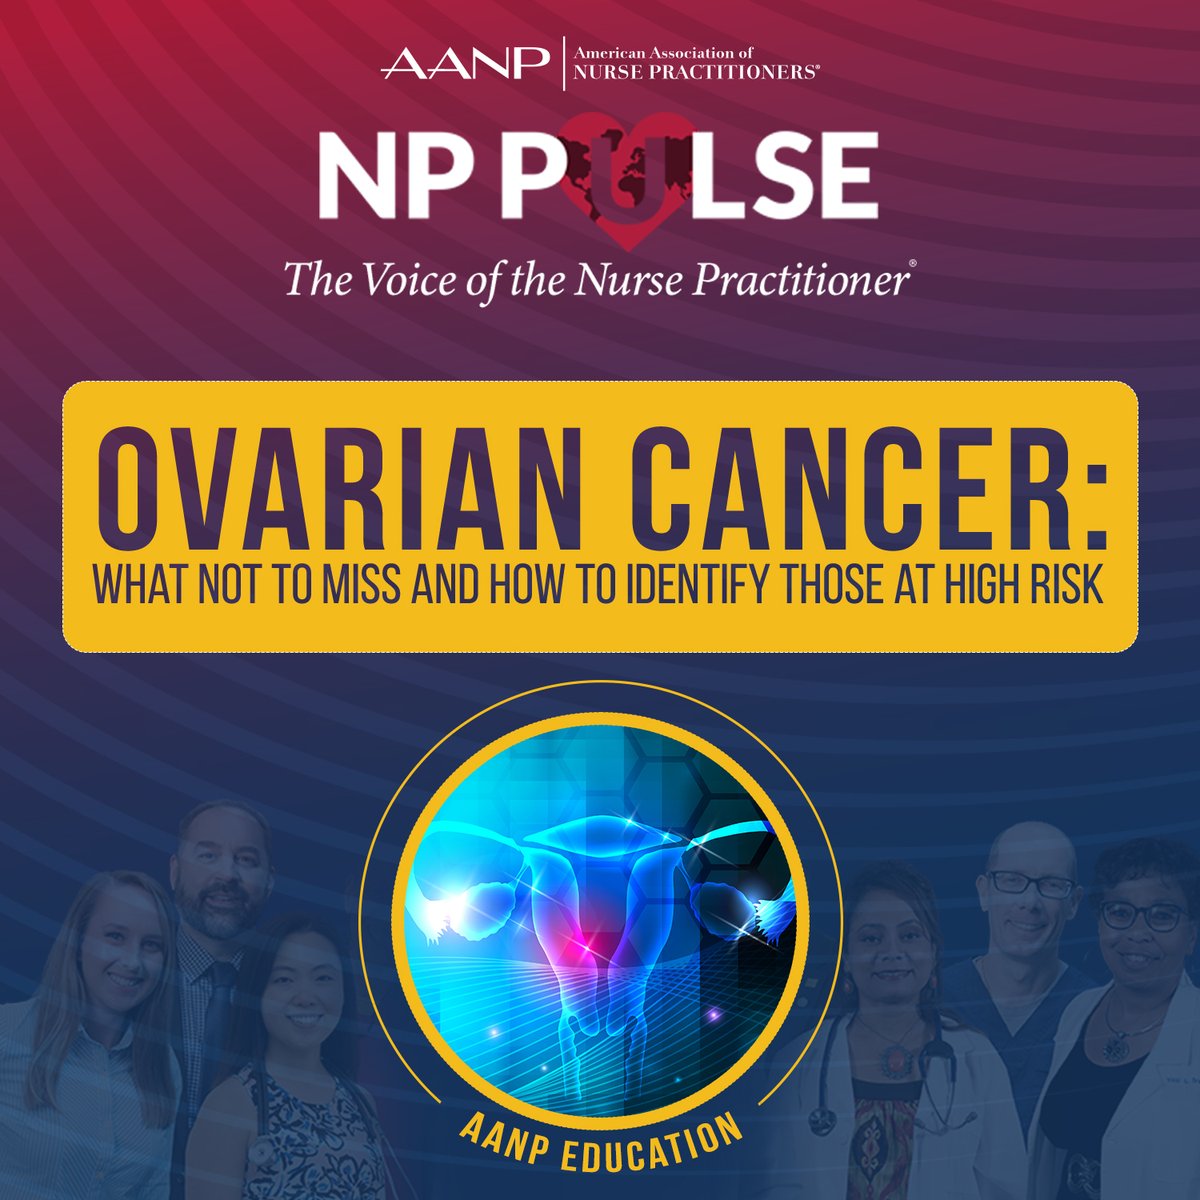 On the latest episode of NP Pulse: The Voice of the Nurse Practitioner®, NP experts Sarah Rossi and Lauren Mahon review the identification of ovarian cancer and initial work-up for patients suspected to have ovarian cancer. Listen now: aanp.org/podcast. #NPsLead